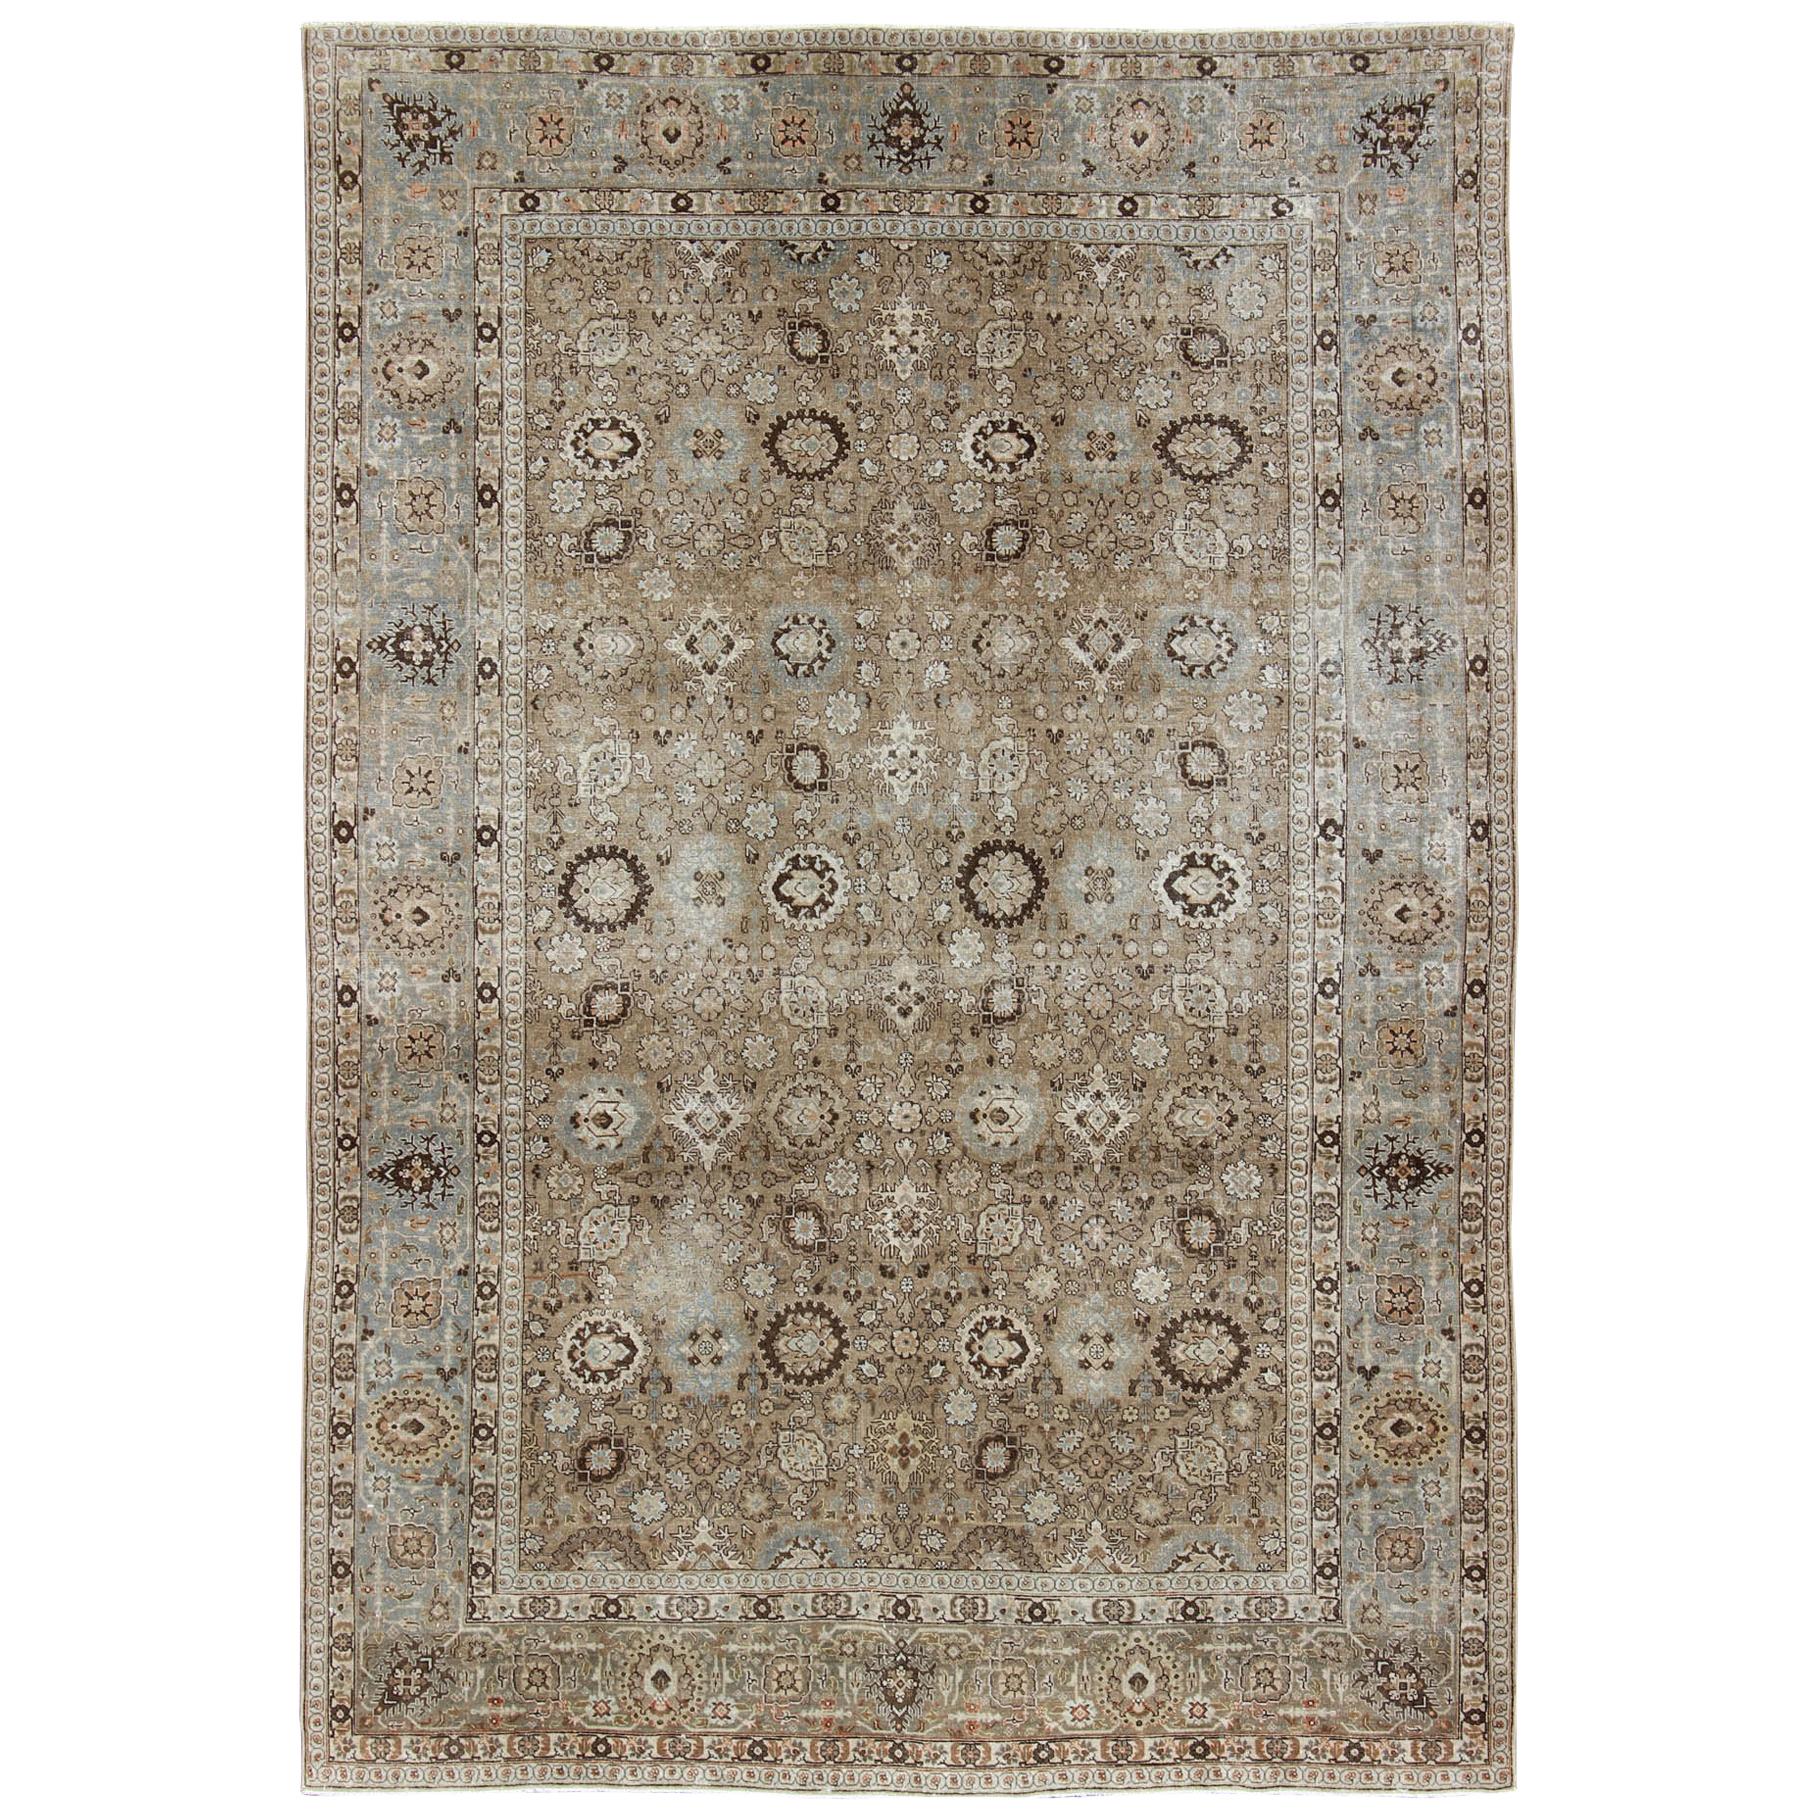 Antique Persian Tabriz Rug in Mocha, Camel, Brown, Gray and Light Blue For Sale